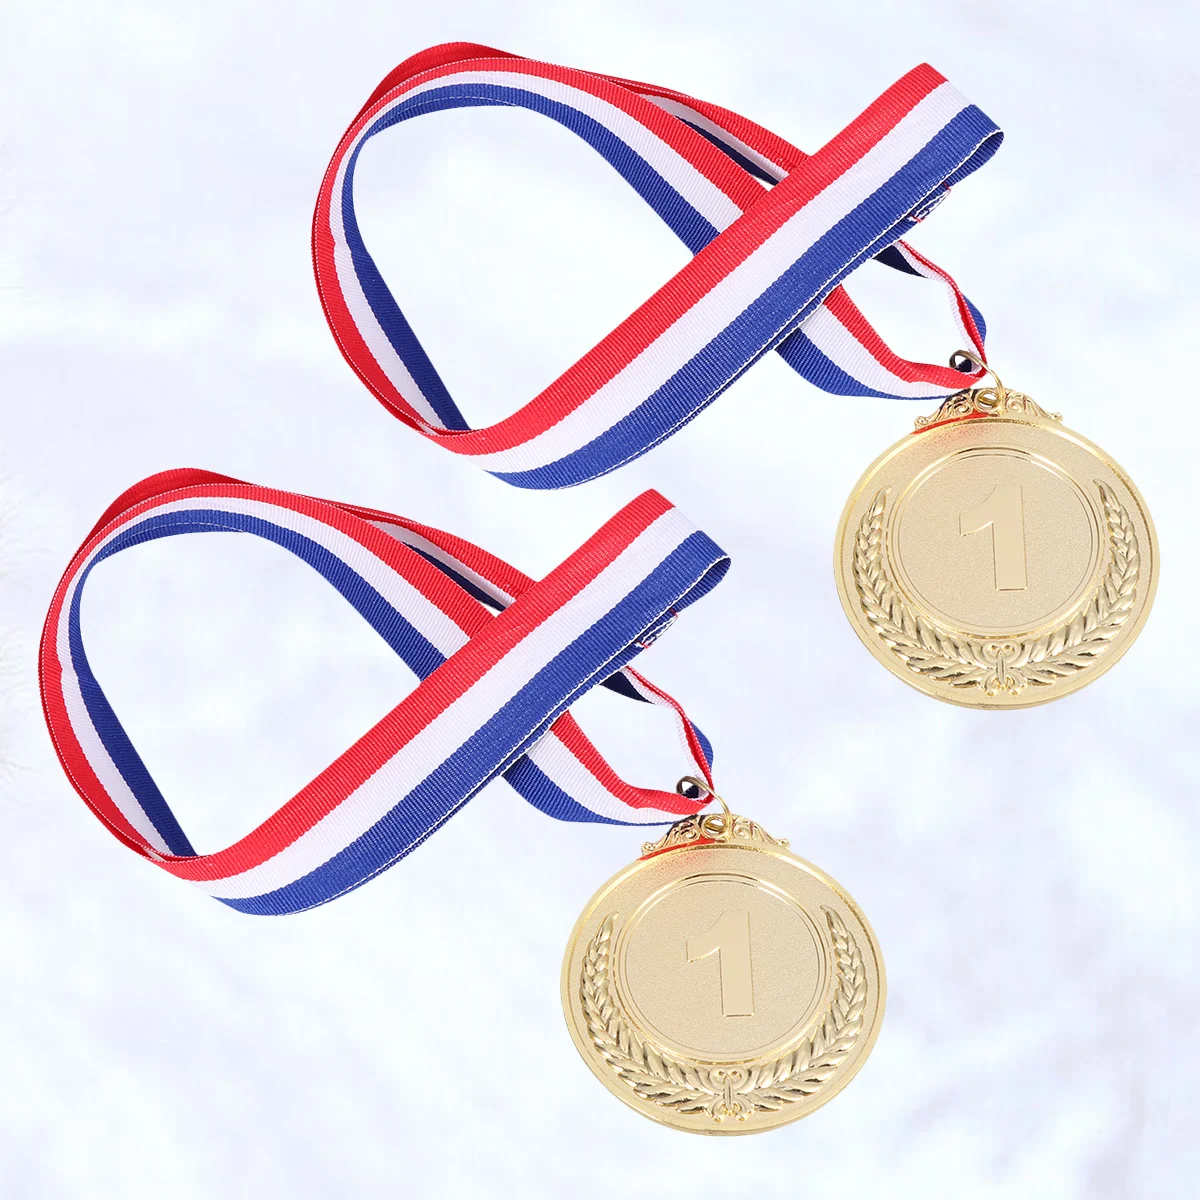 

2pcs Metal Award Medals with Neck Ribbon Wheats Winner Medal for Sports Games Competition (Golden, the First Prize)